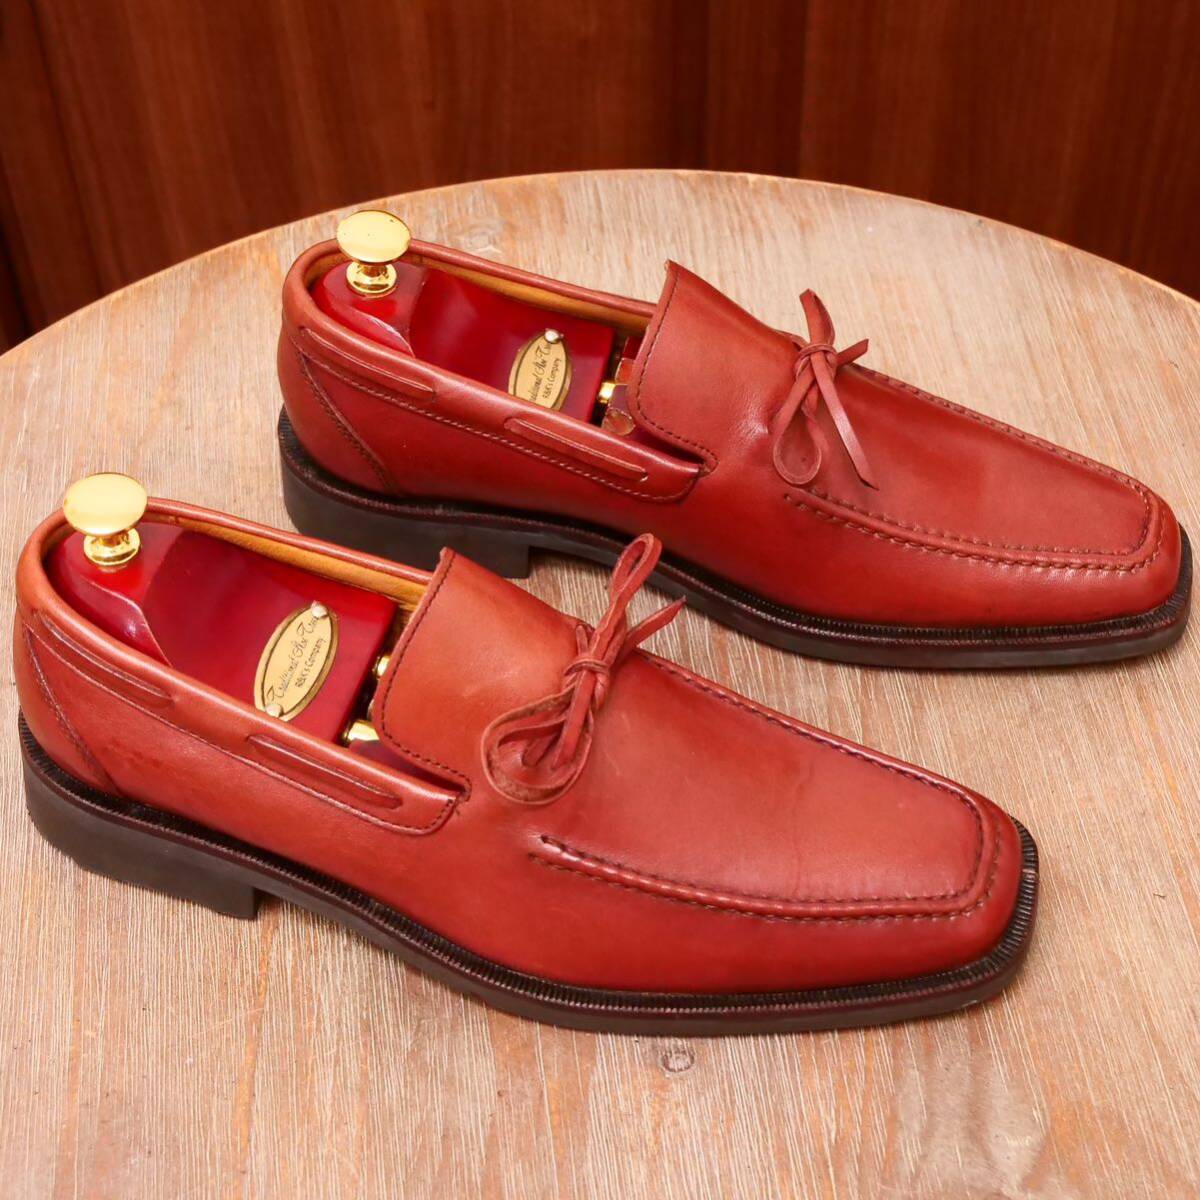  ultimate beautiful goods *[JUNKO SHMADA] Junko Shimada Van p Loafer 25cm rom and rear (before and after) business casual men's leather shoes 